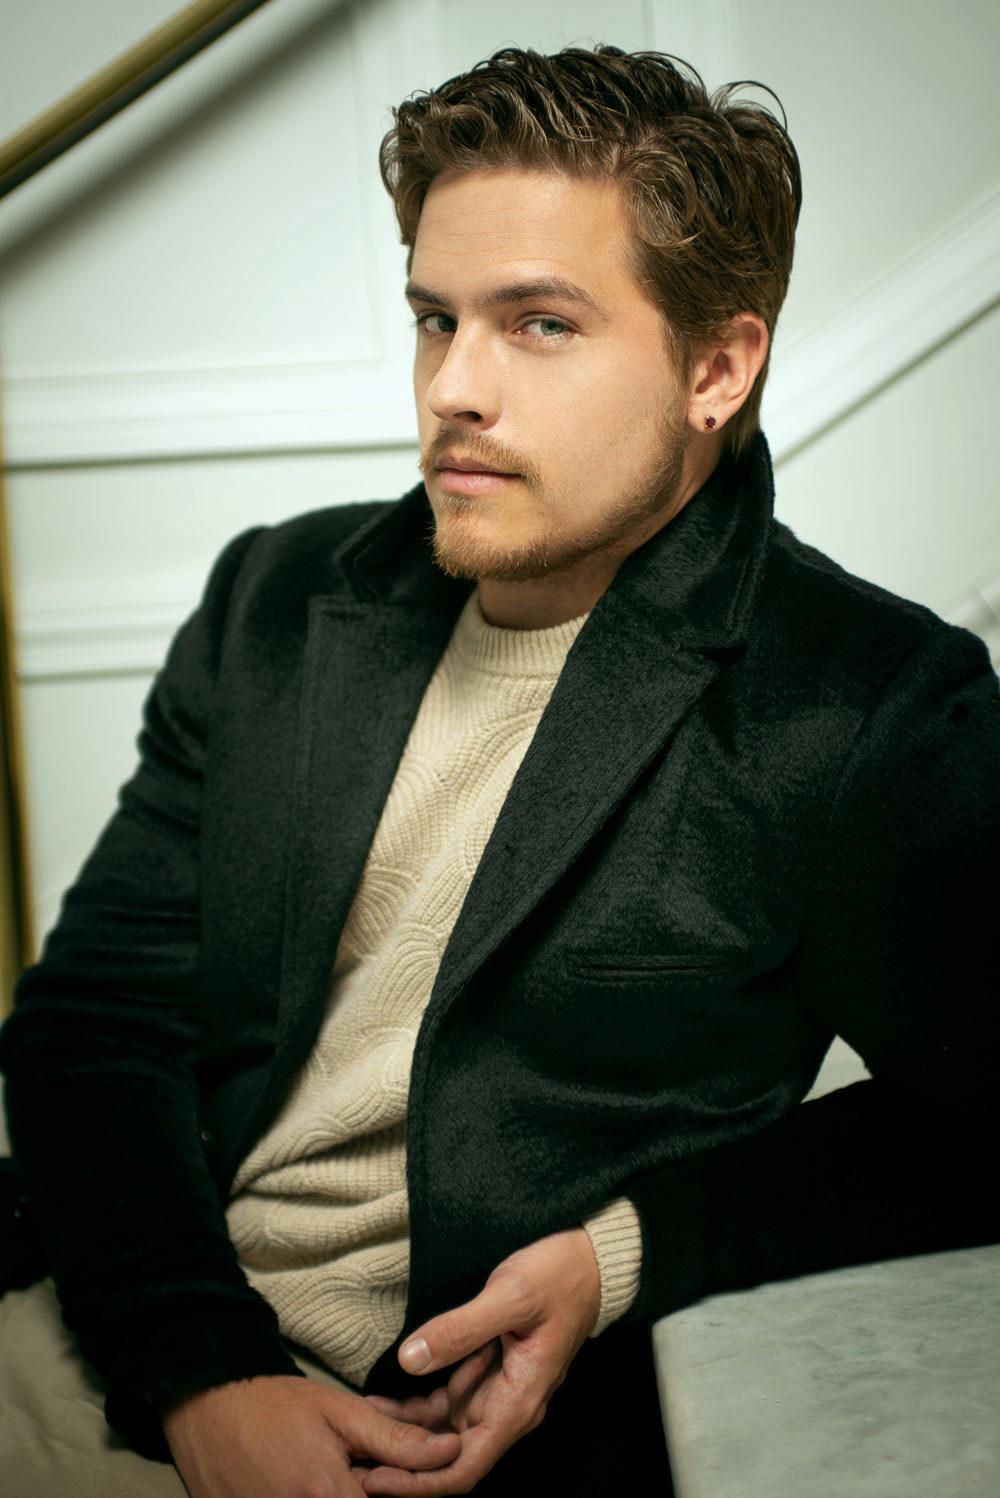 Dylan Sprouse image